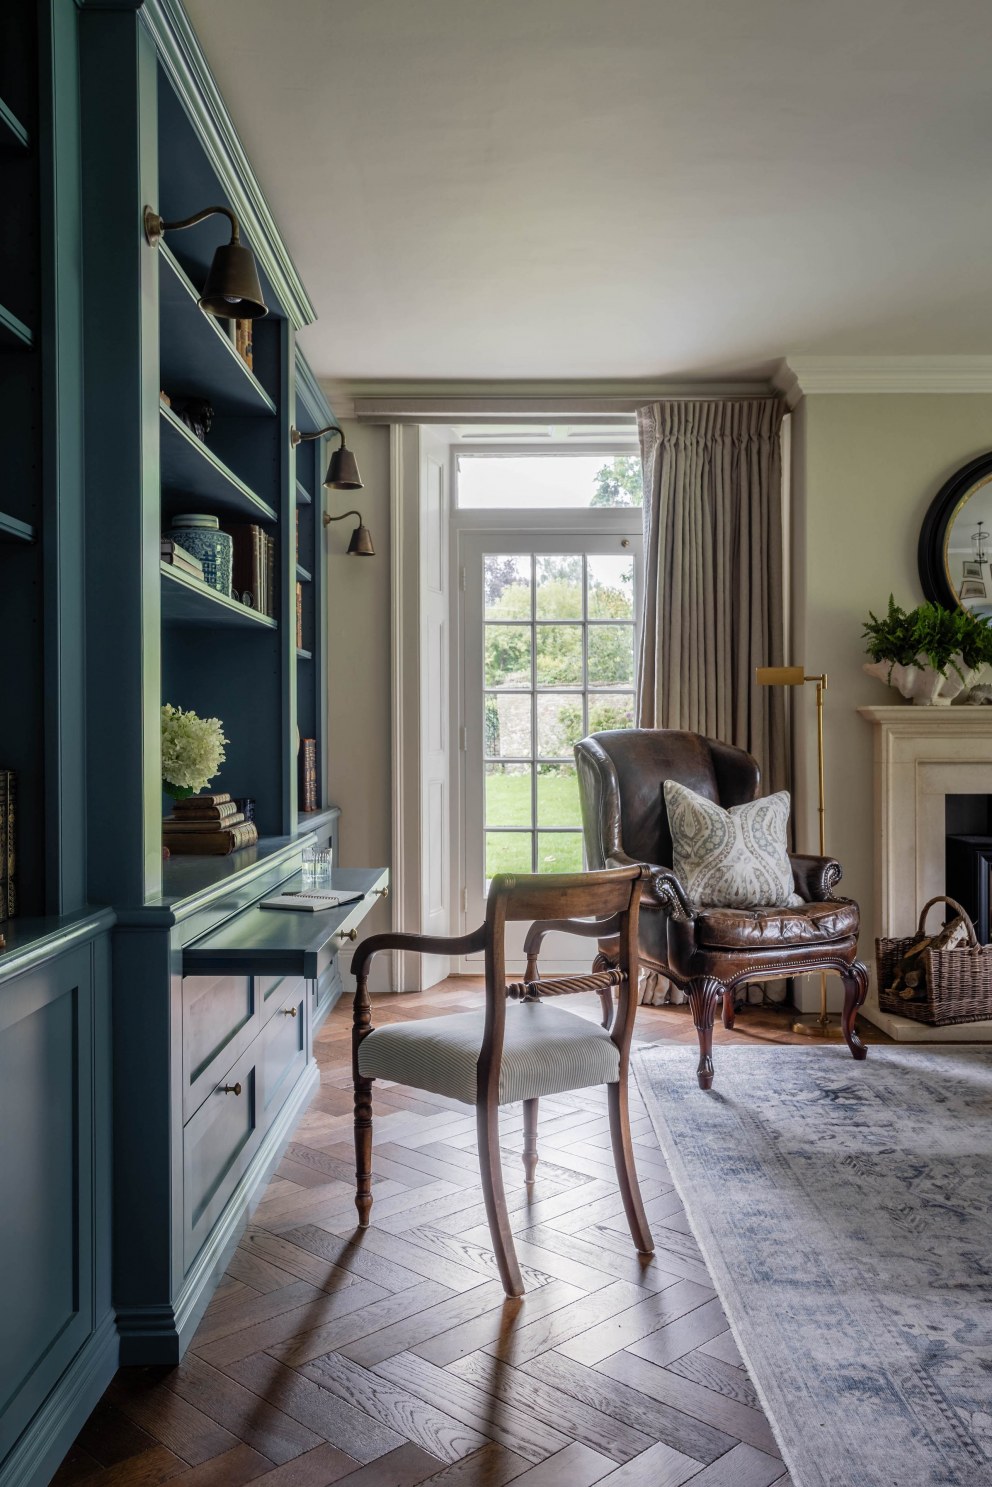 Manor House | Living room showing new joinery | Interior Designers